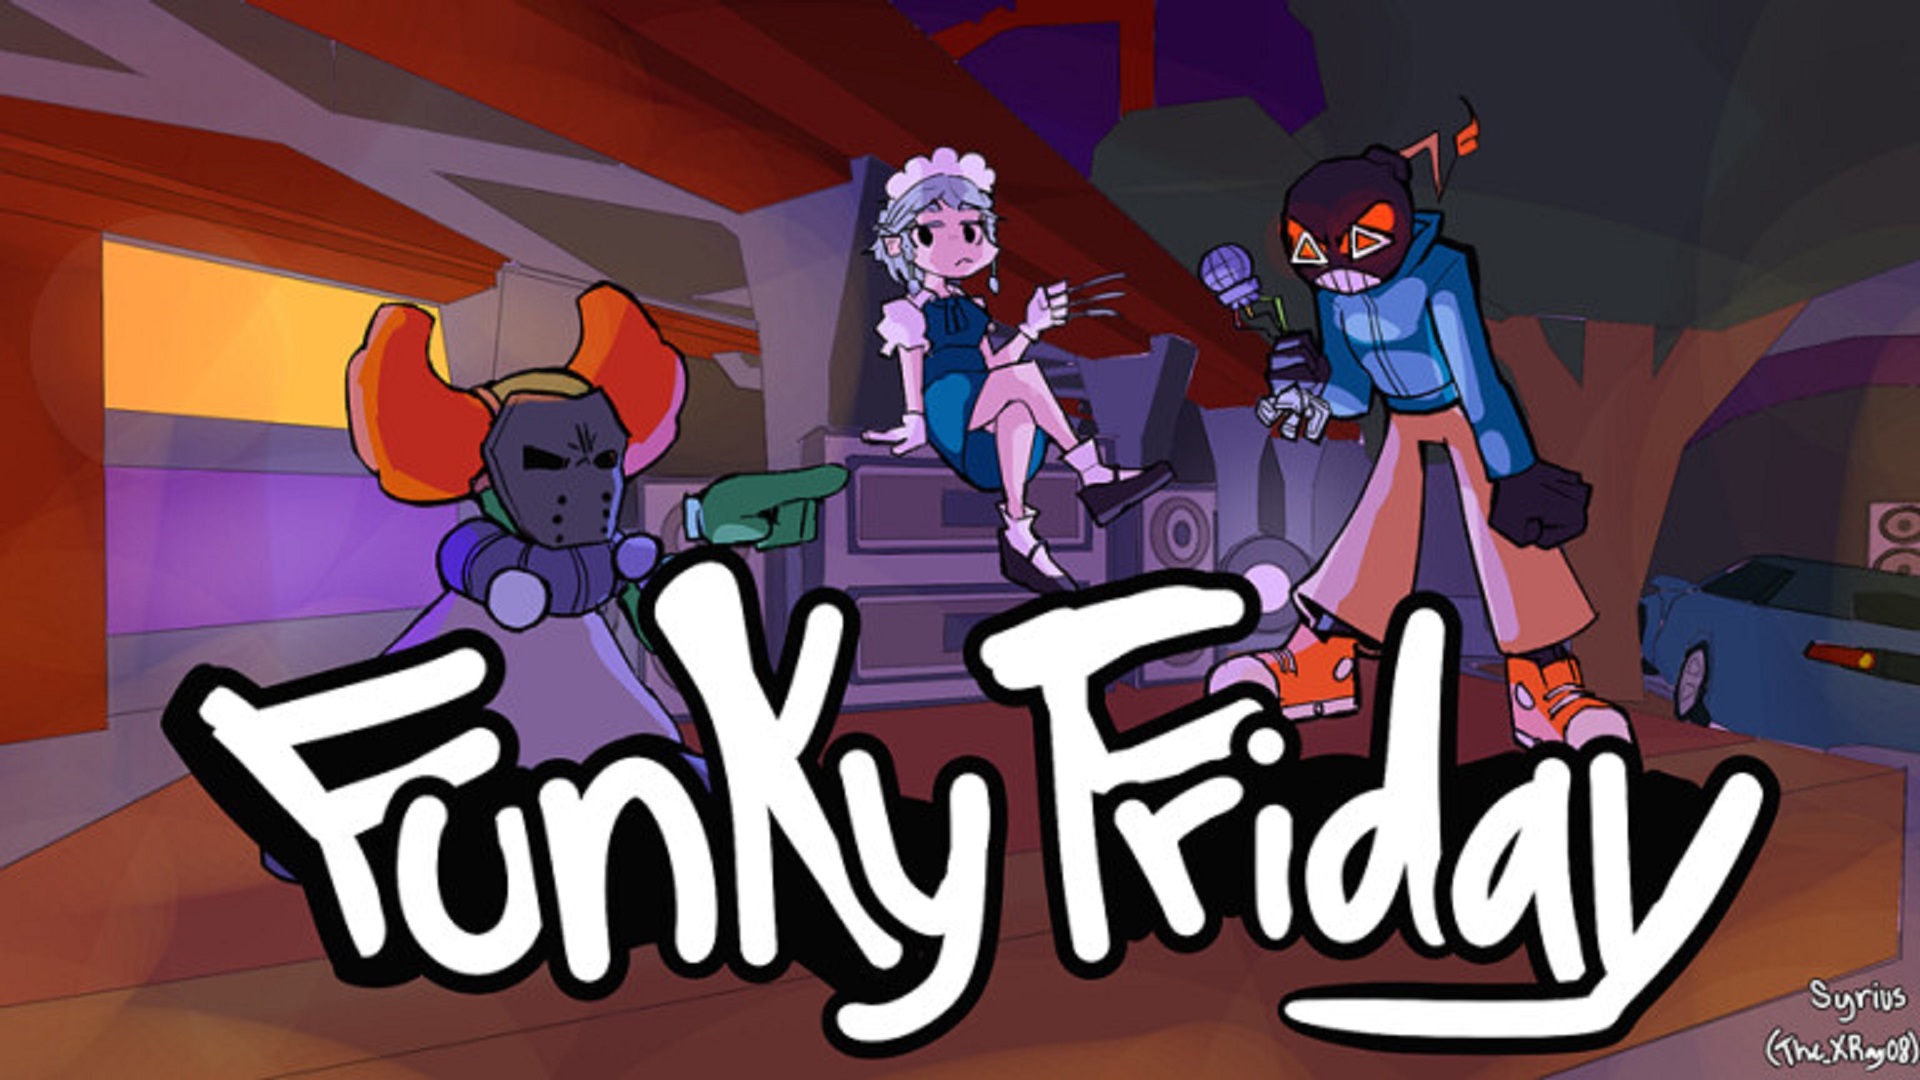 MIND GAMES* FUNKY FRIDAY CODES MIND GAMES New Funky Friday Codes (2022  August) - BiliBili